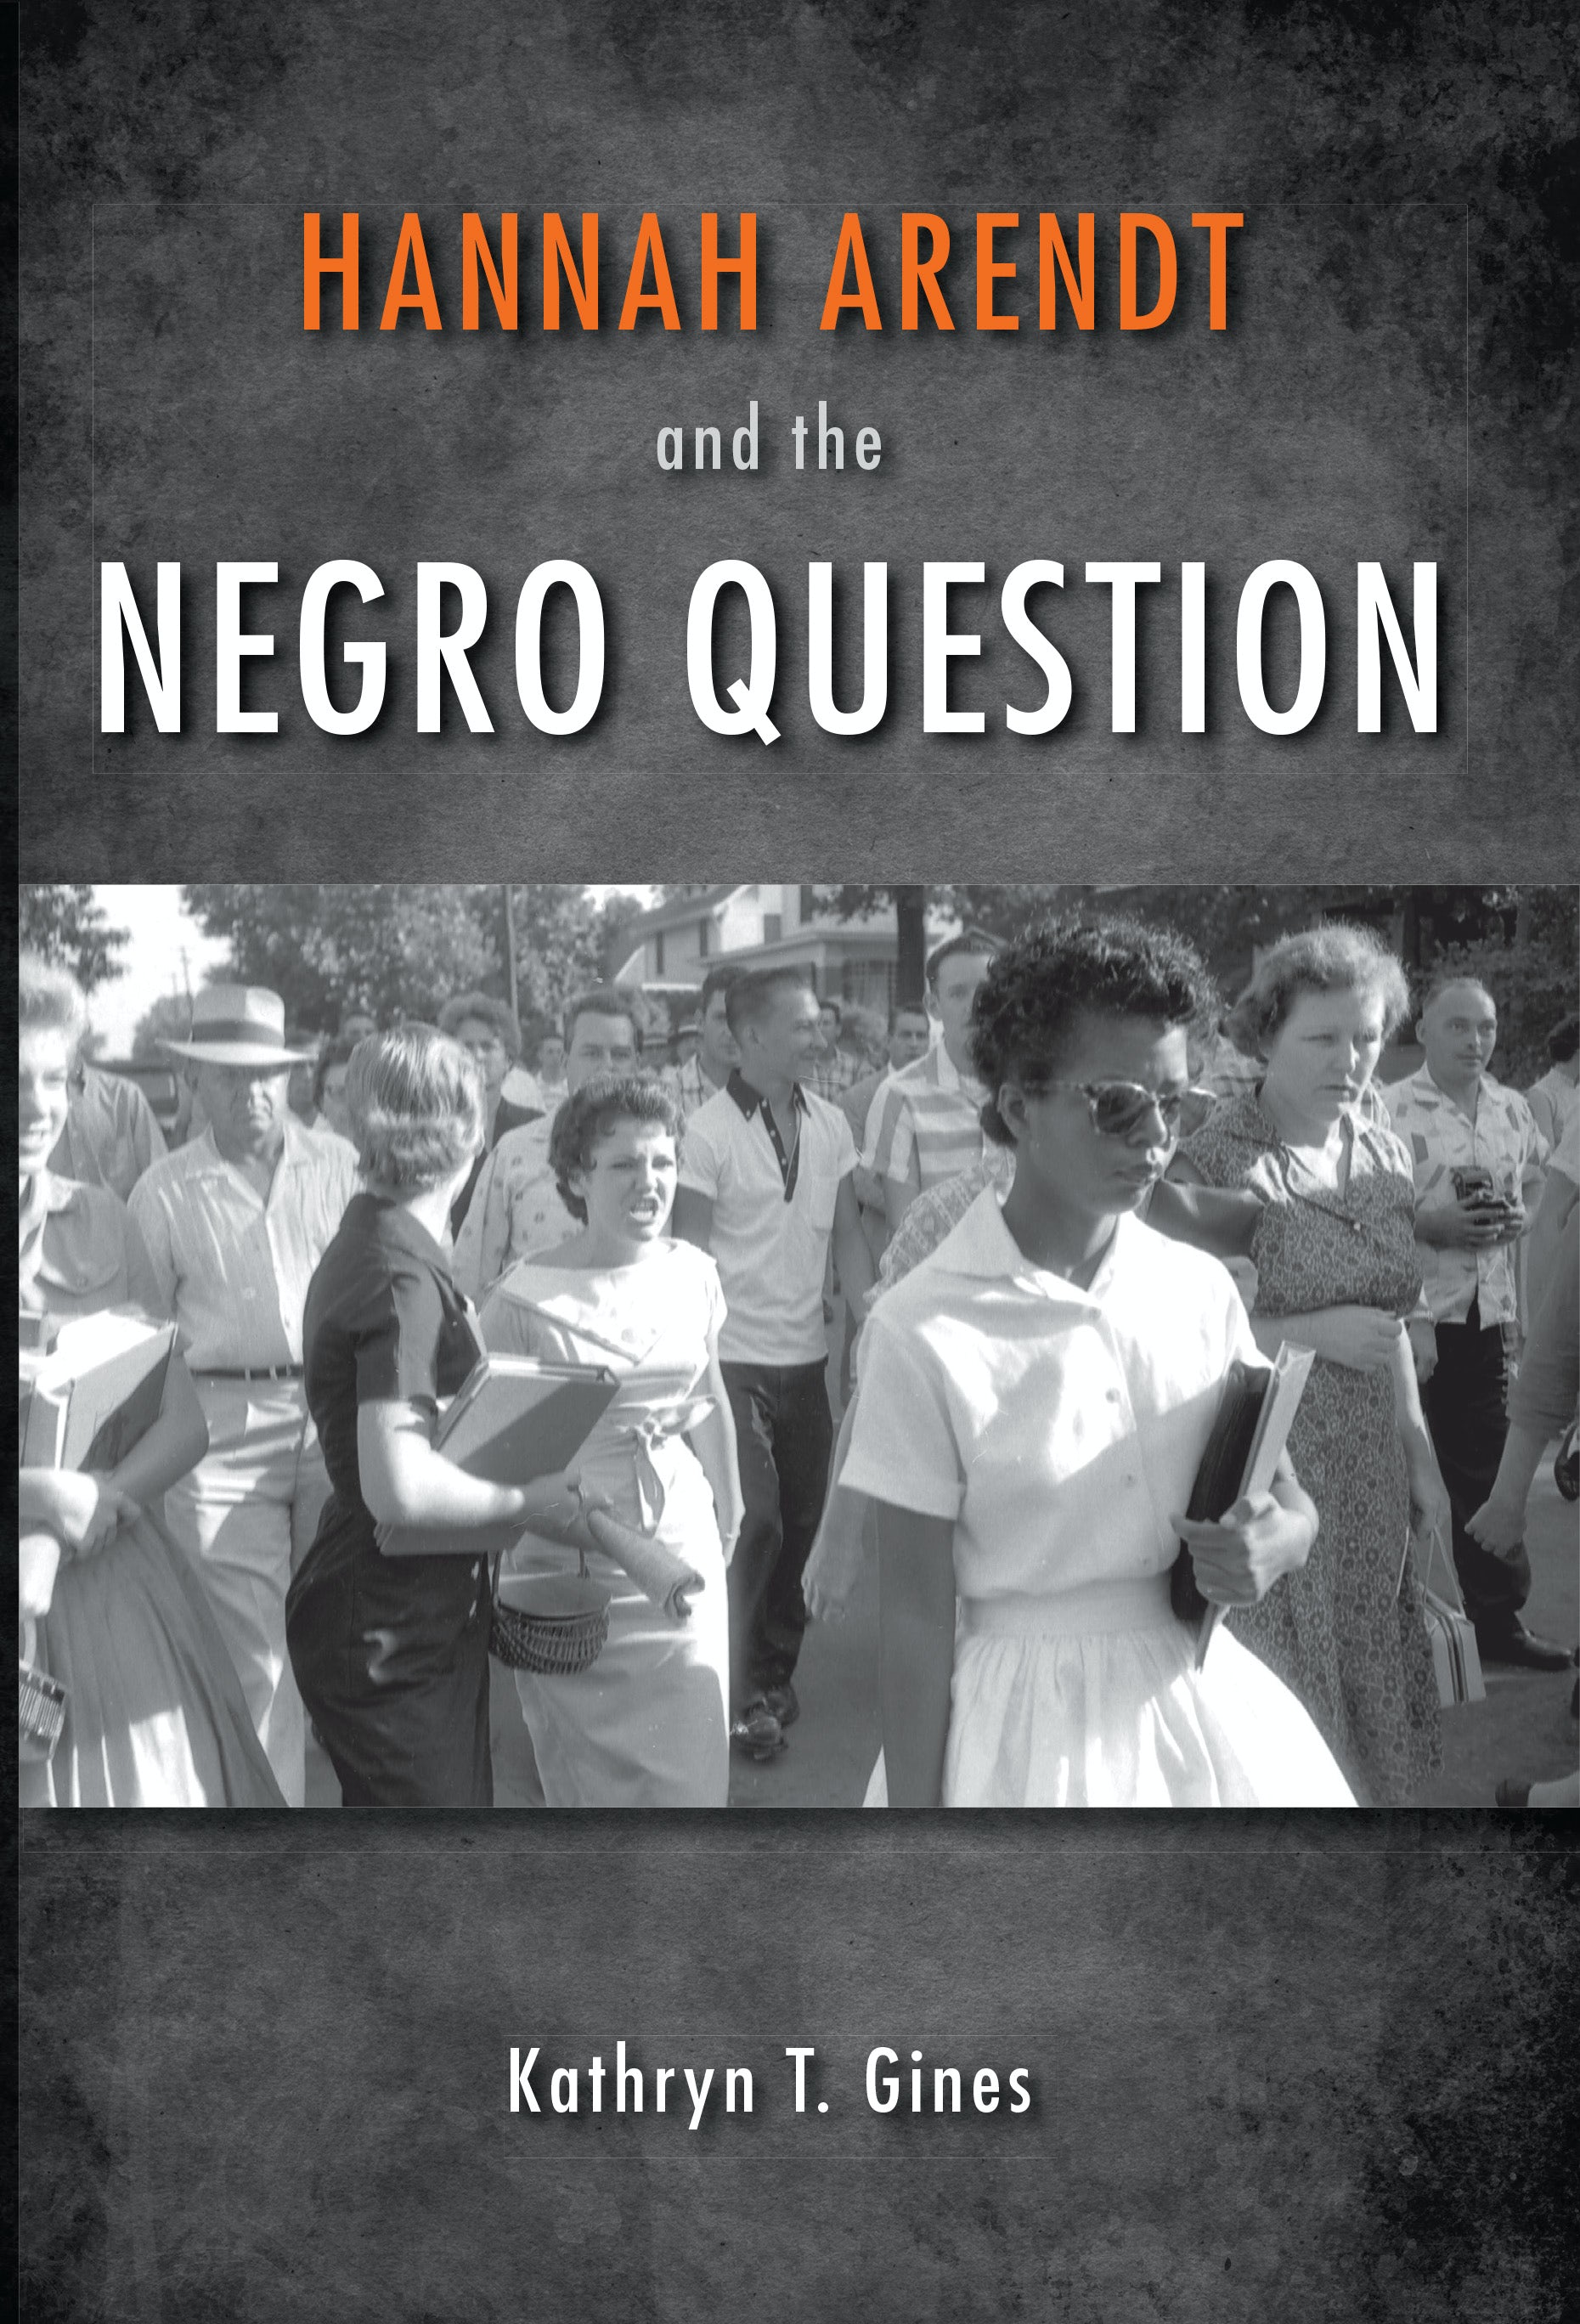 Kathryn Sophia Belle: Hannah Arendt and the Negro Question (2014, Indiana University Press)